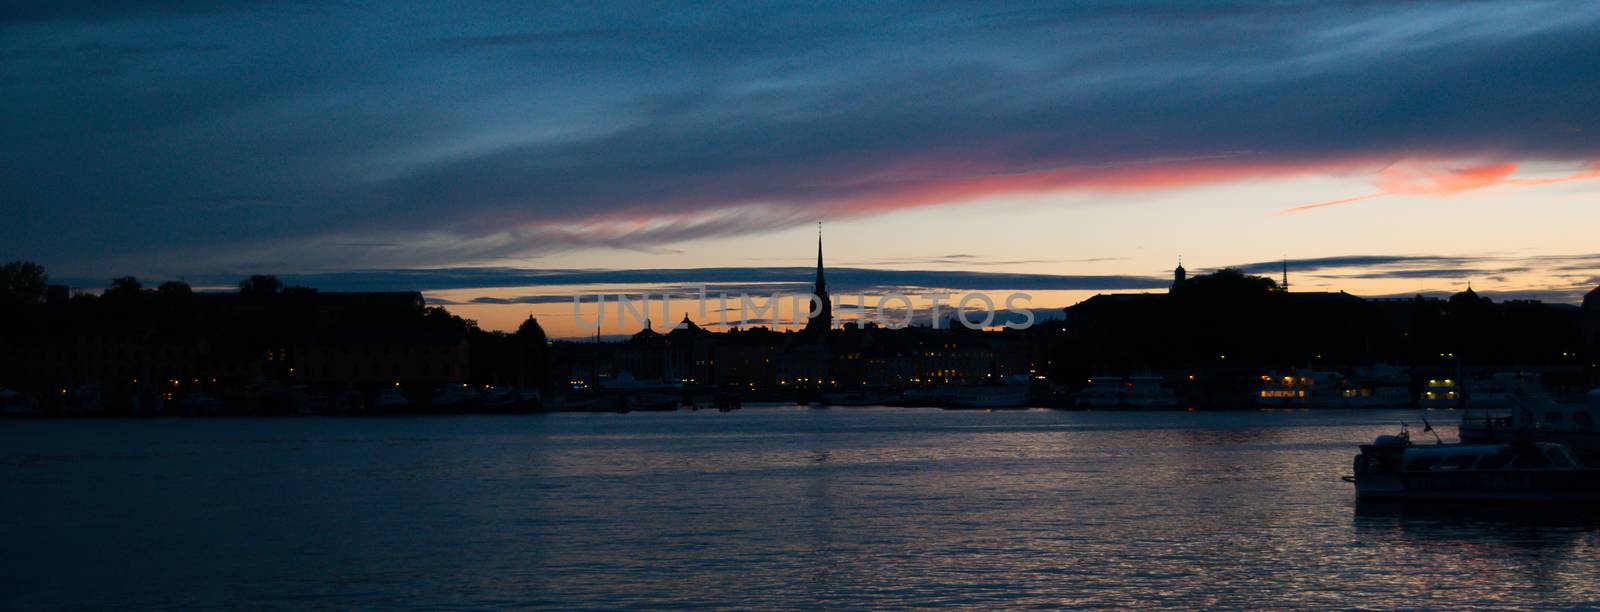 Stockholm sunset view  by javax